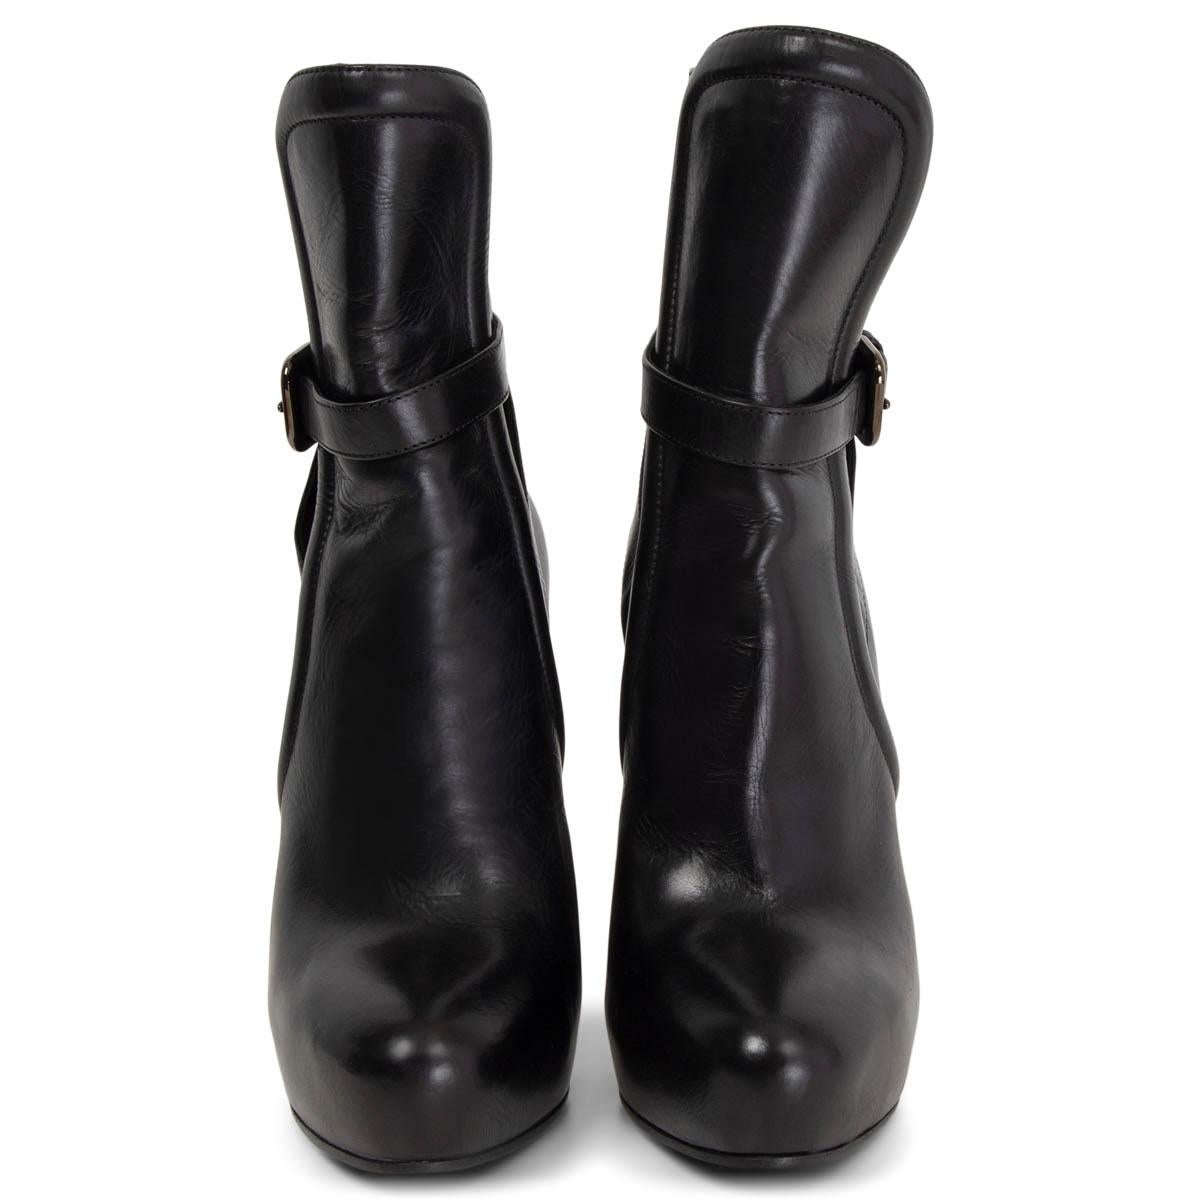 100% authentic Prada platform ankle-boots in black calfskin with gunmetal buckle detail on the side. Have been worn once inside and are in virtually new condition. 

Measurements
Imprinted Size	36
Shoe Size	36
Inside Sole	23cm (9in)
Width	6.5cm